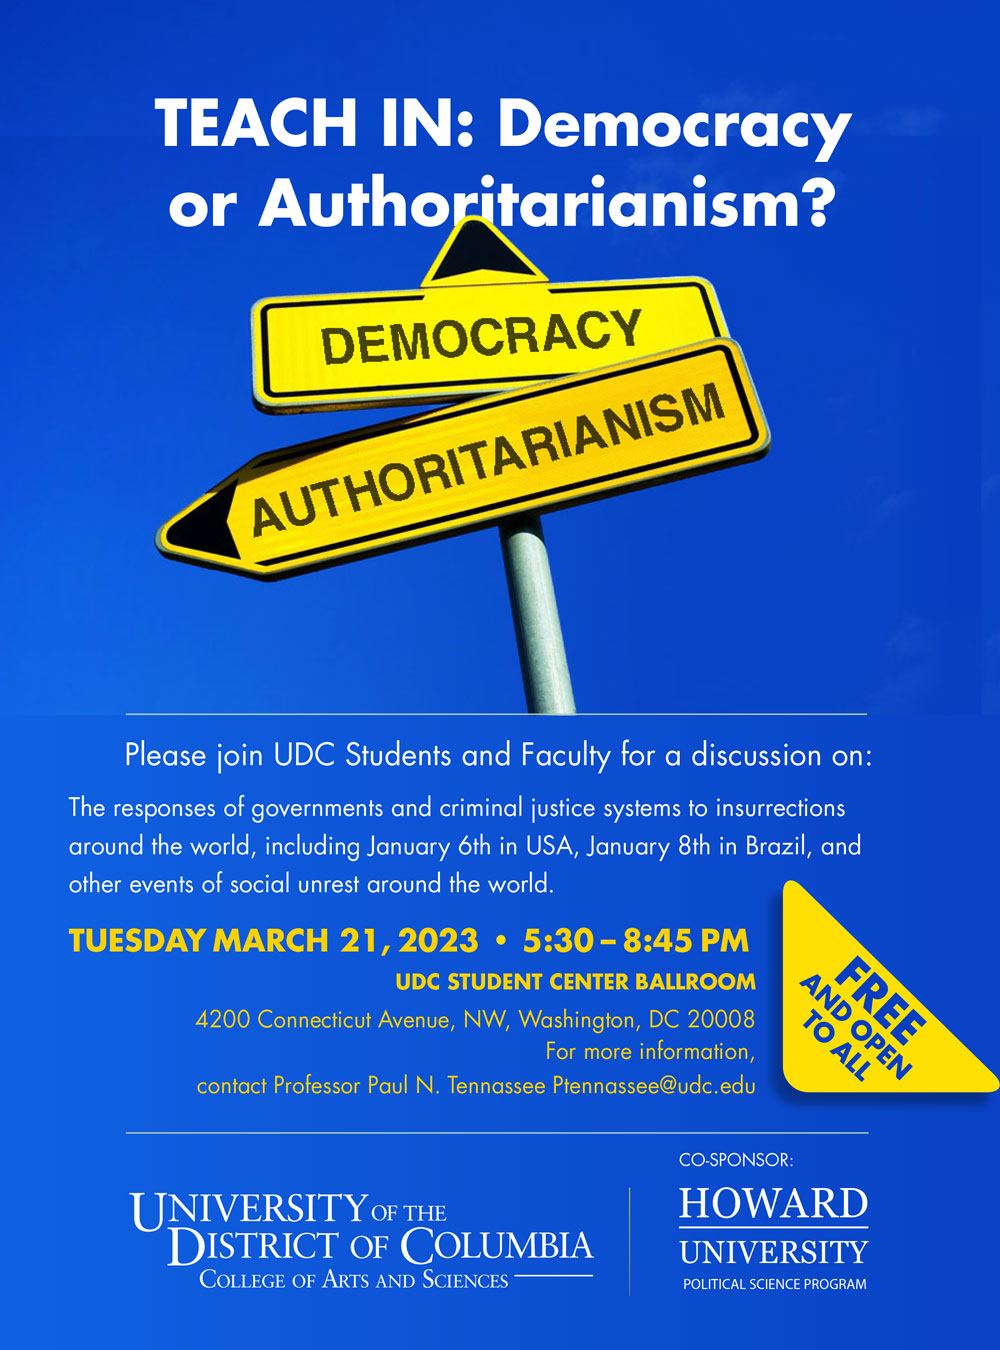 Please join Professor Paul Tennassee, faculty, and students for TEACH IN: Democracy or Authoritarianism? This panel discussion will look at the responses of governments and criminal justice systems to insurrections around the world, including January 6th in USA, January 8th in Brazil, and other events of social unrest around the world. Tuesday, March 21st at 5:30 pm | UDC Student Center Ballroom | Please Share Across the globe, in multiple nation-states, citizens are engaged in uprisings, protests, and insurrections. The role of states, public safety, the rule of law, and the fundamentals of justice are tested constantly. Some insurrections seek to subvert democracy while others pursue democratic ideals. The global balance of power, geopolitically, is tilting in uncertain and unpredictable directions. As such, we need to analyze and examine how Democracy fares against Autocracy in the world today. At the same time, we must consider how we as citizens assume responsibility in advancing freedom locally, nationally, and globally. For more information, contact Professor Paul N. Tennassee Ptennassee@udc.edu